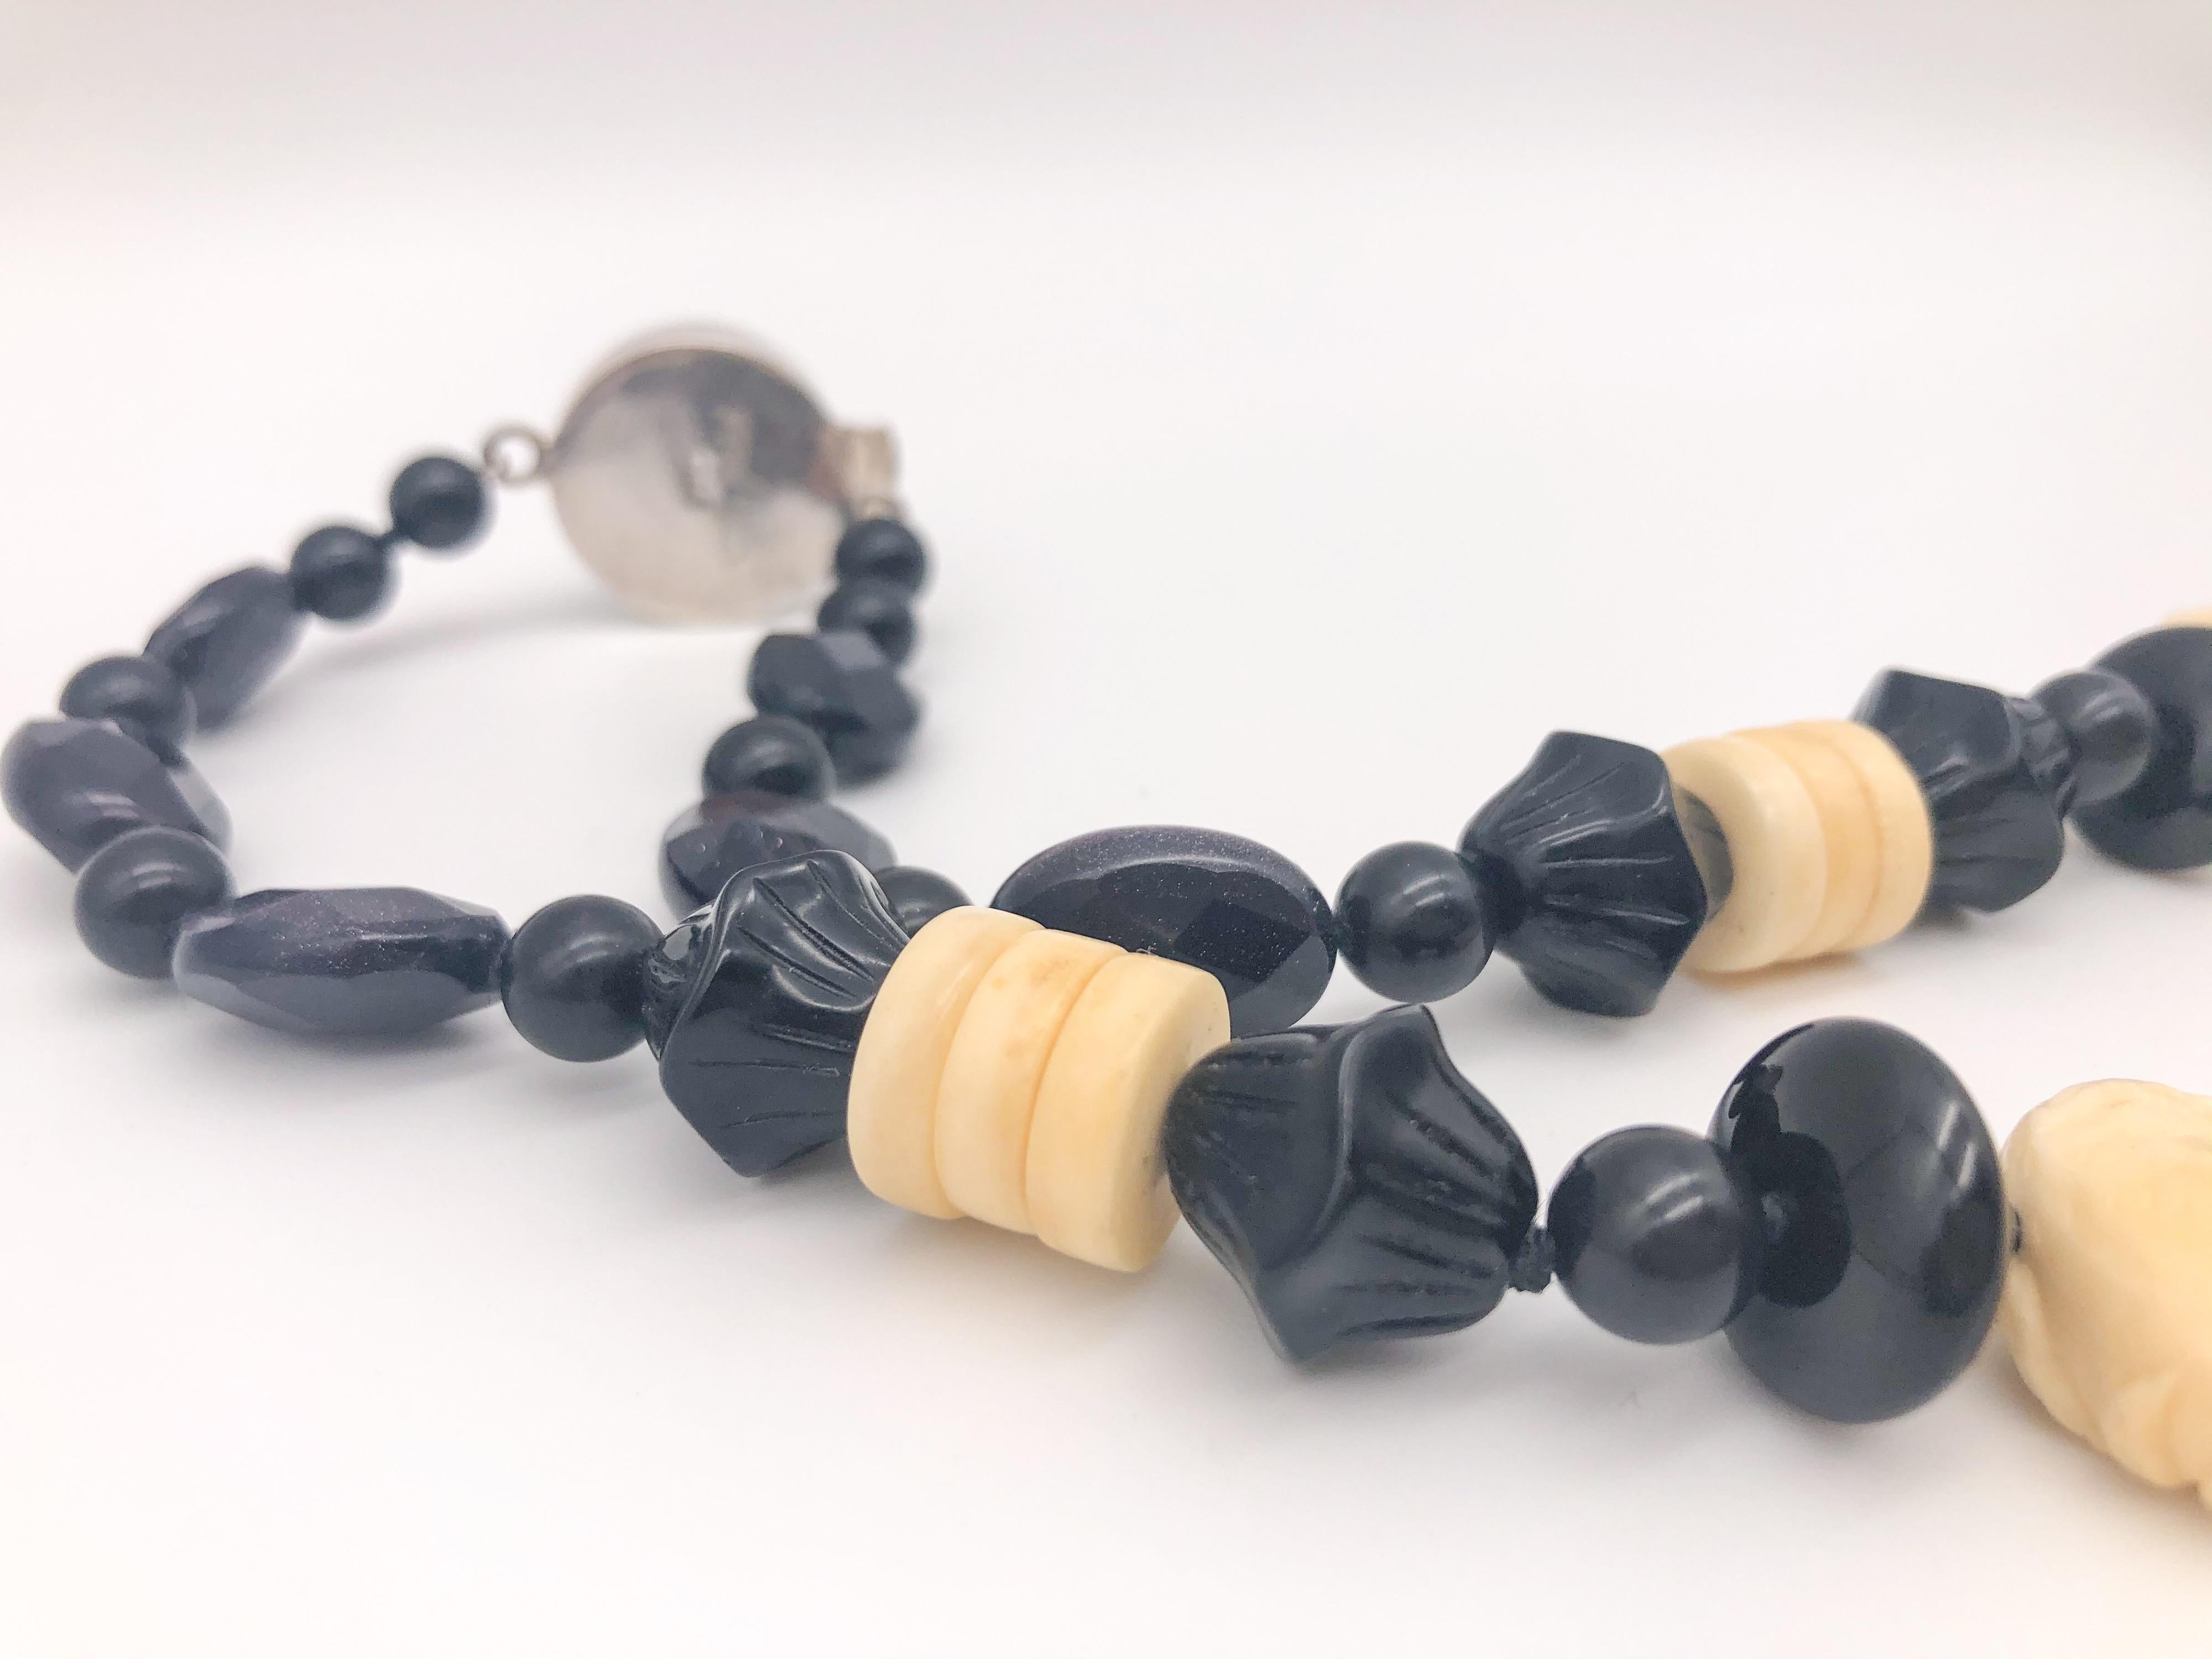 Mixed Cut A.Jeschel Onyx and Carved Bone Chinese zodiac necklace